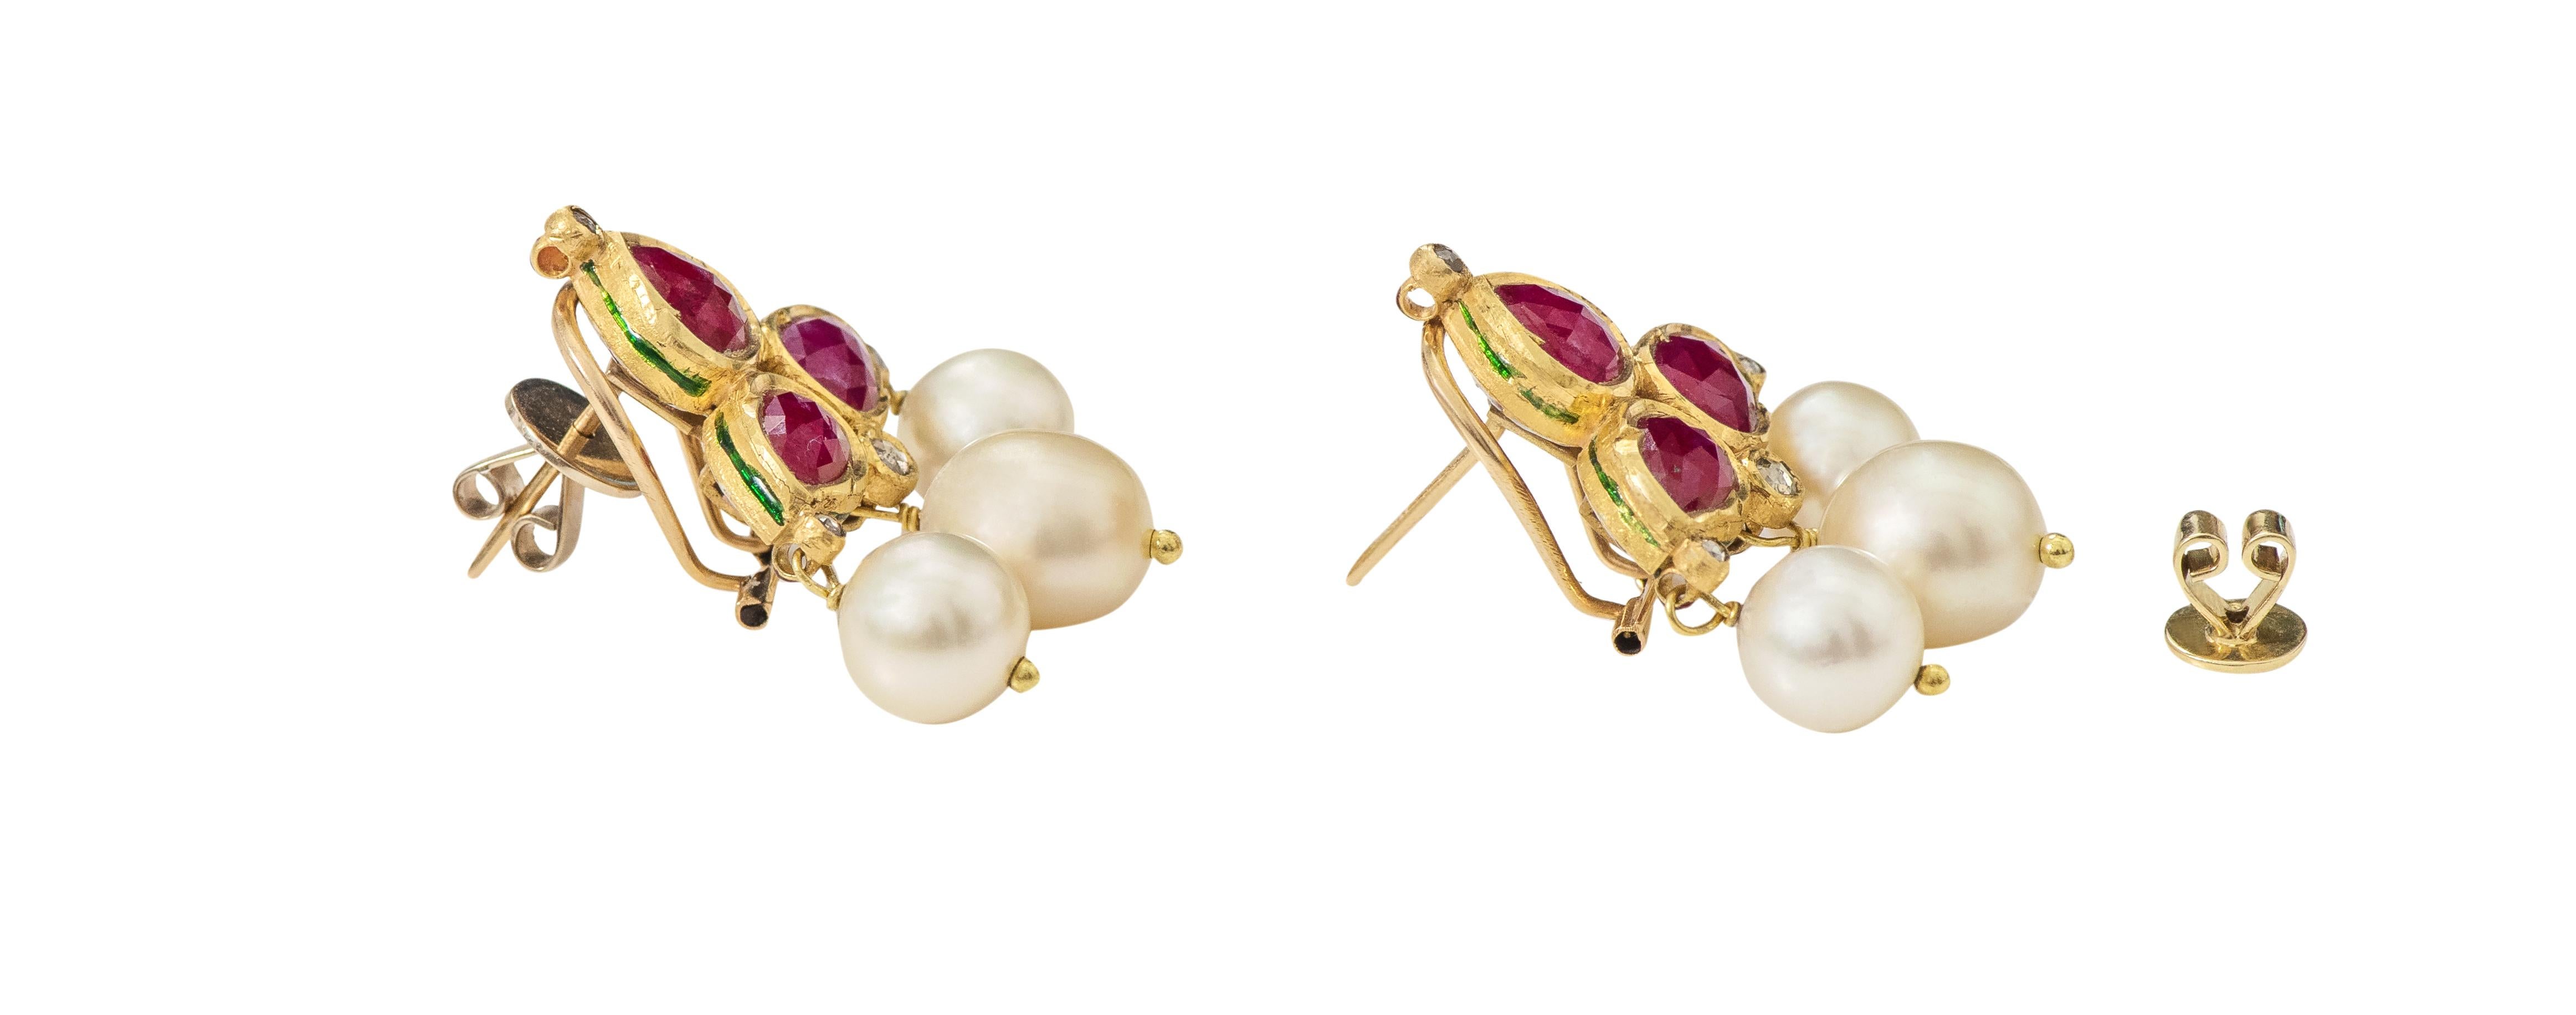 Rose Cut 22 Karat Gold Ruby, Diamond, and Pearl Stud Earring Enamel Work Handcrafted For Sale